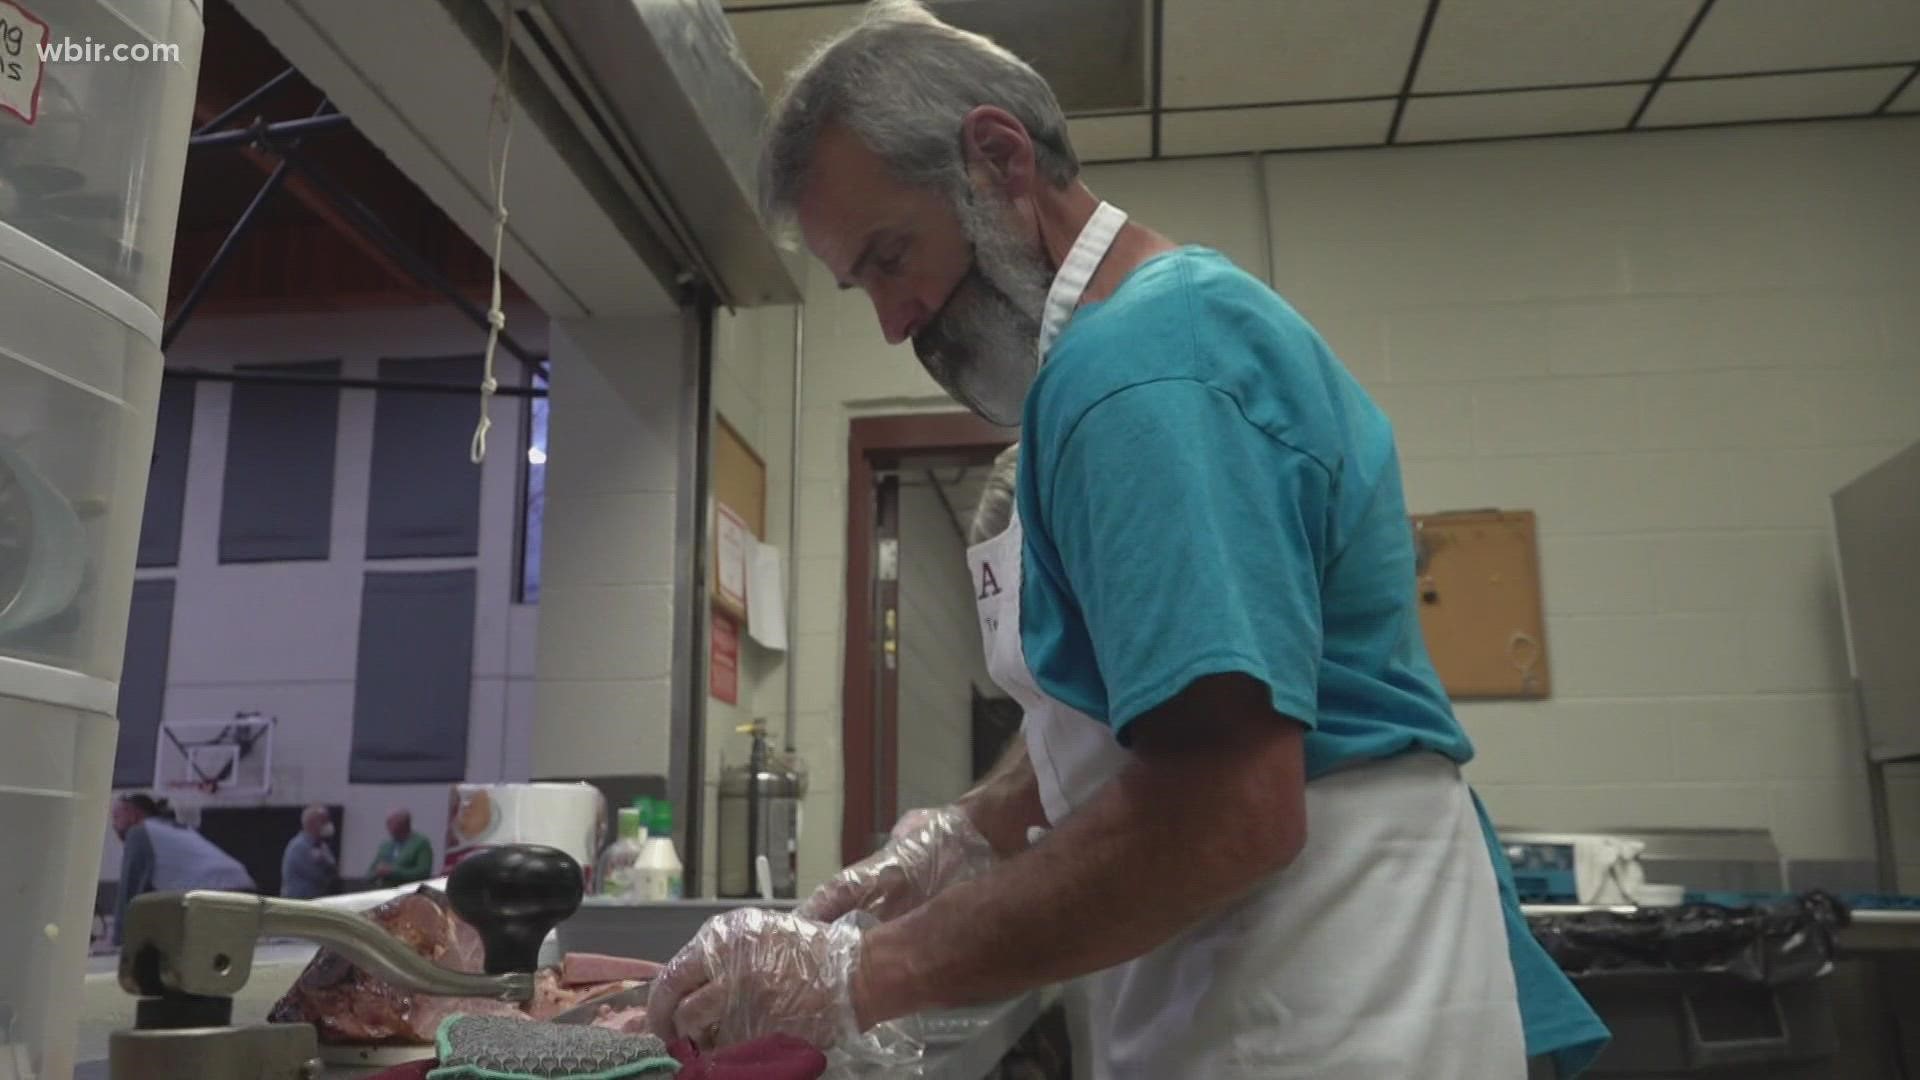 Volunteers at the Longer Table serve homemade meals from scratch for the homeless.